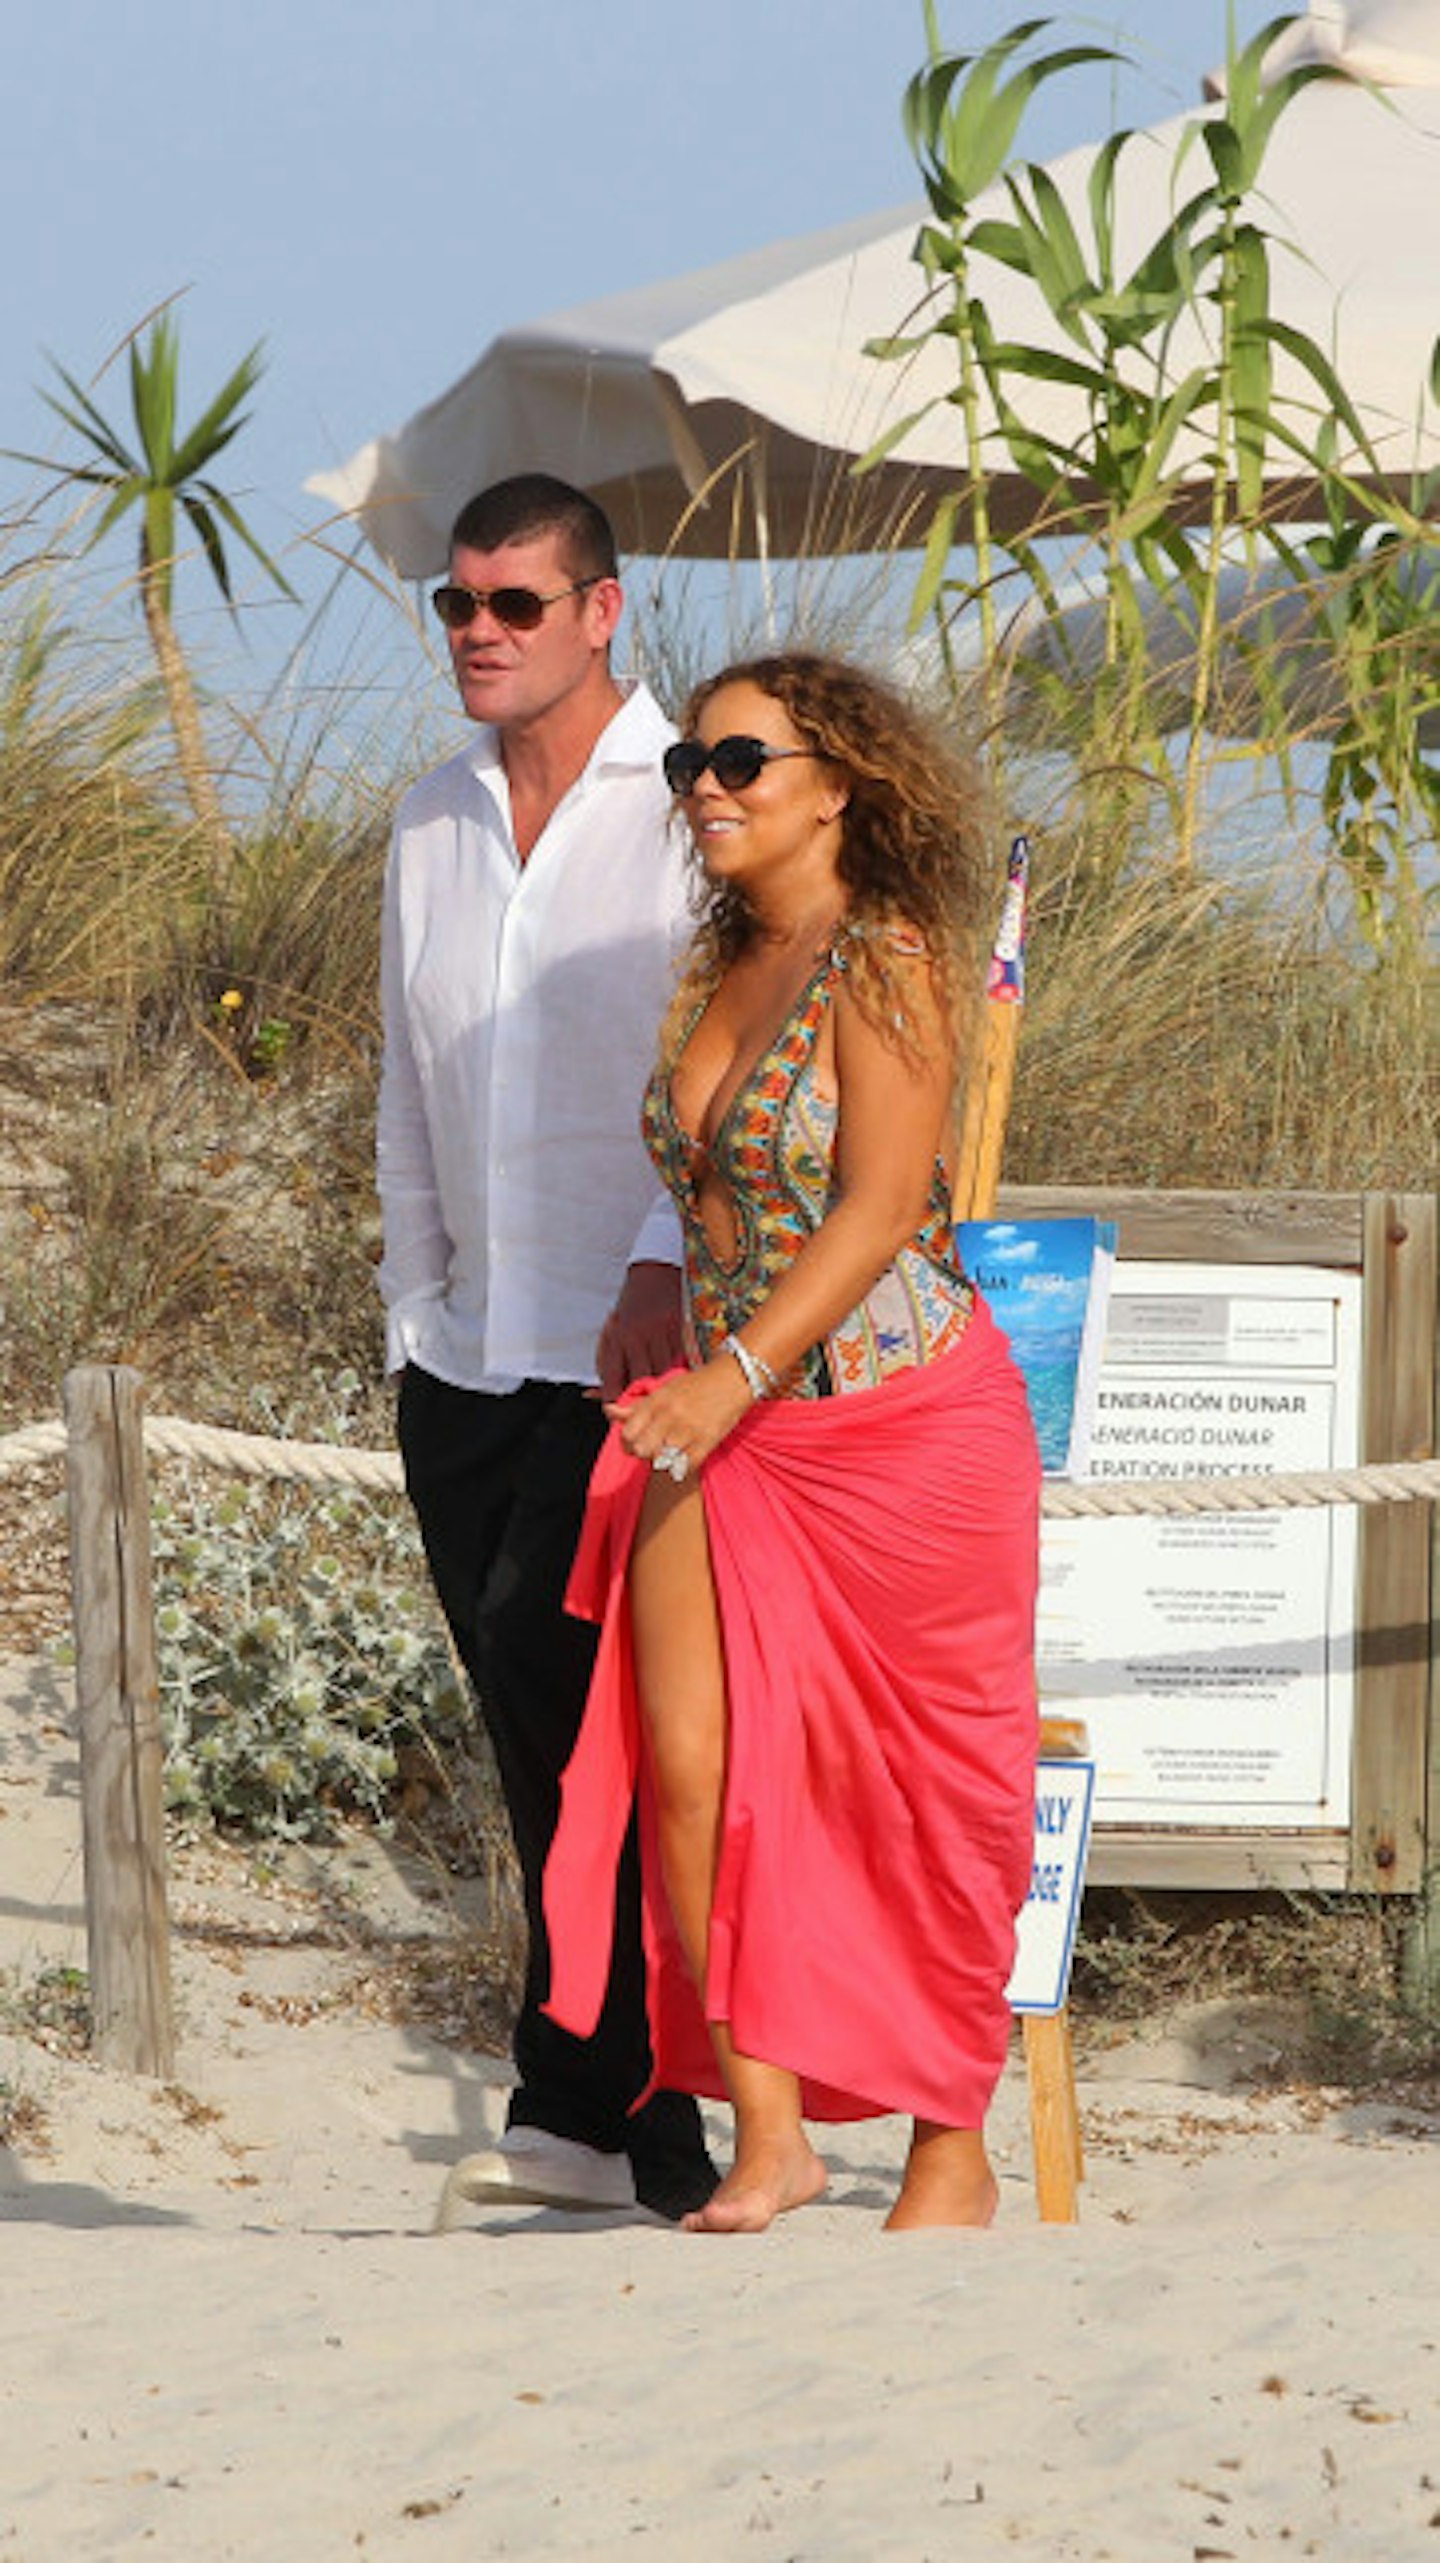 Mariah and James spent much of the summer on holiday together